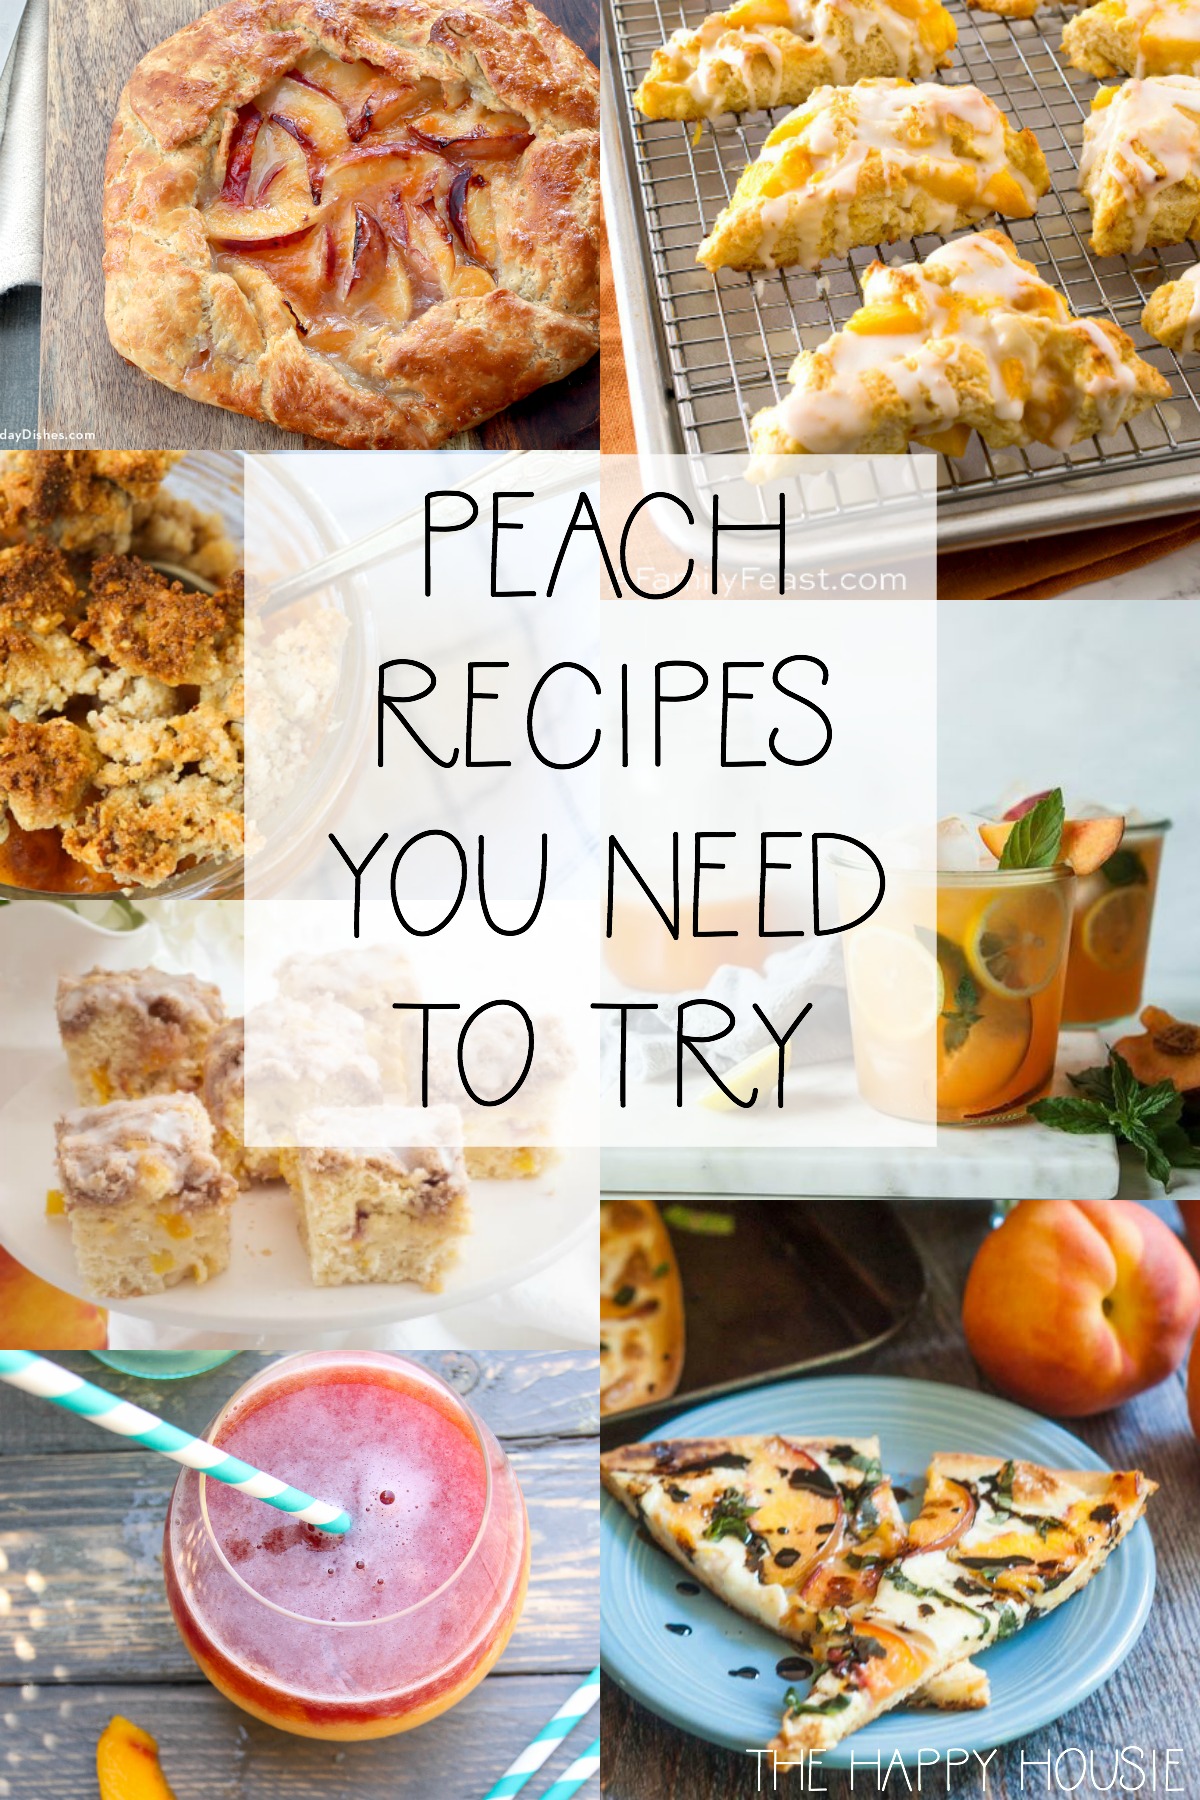 Peach Recipes You Need To Try poster.